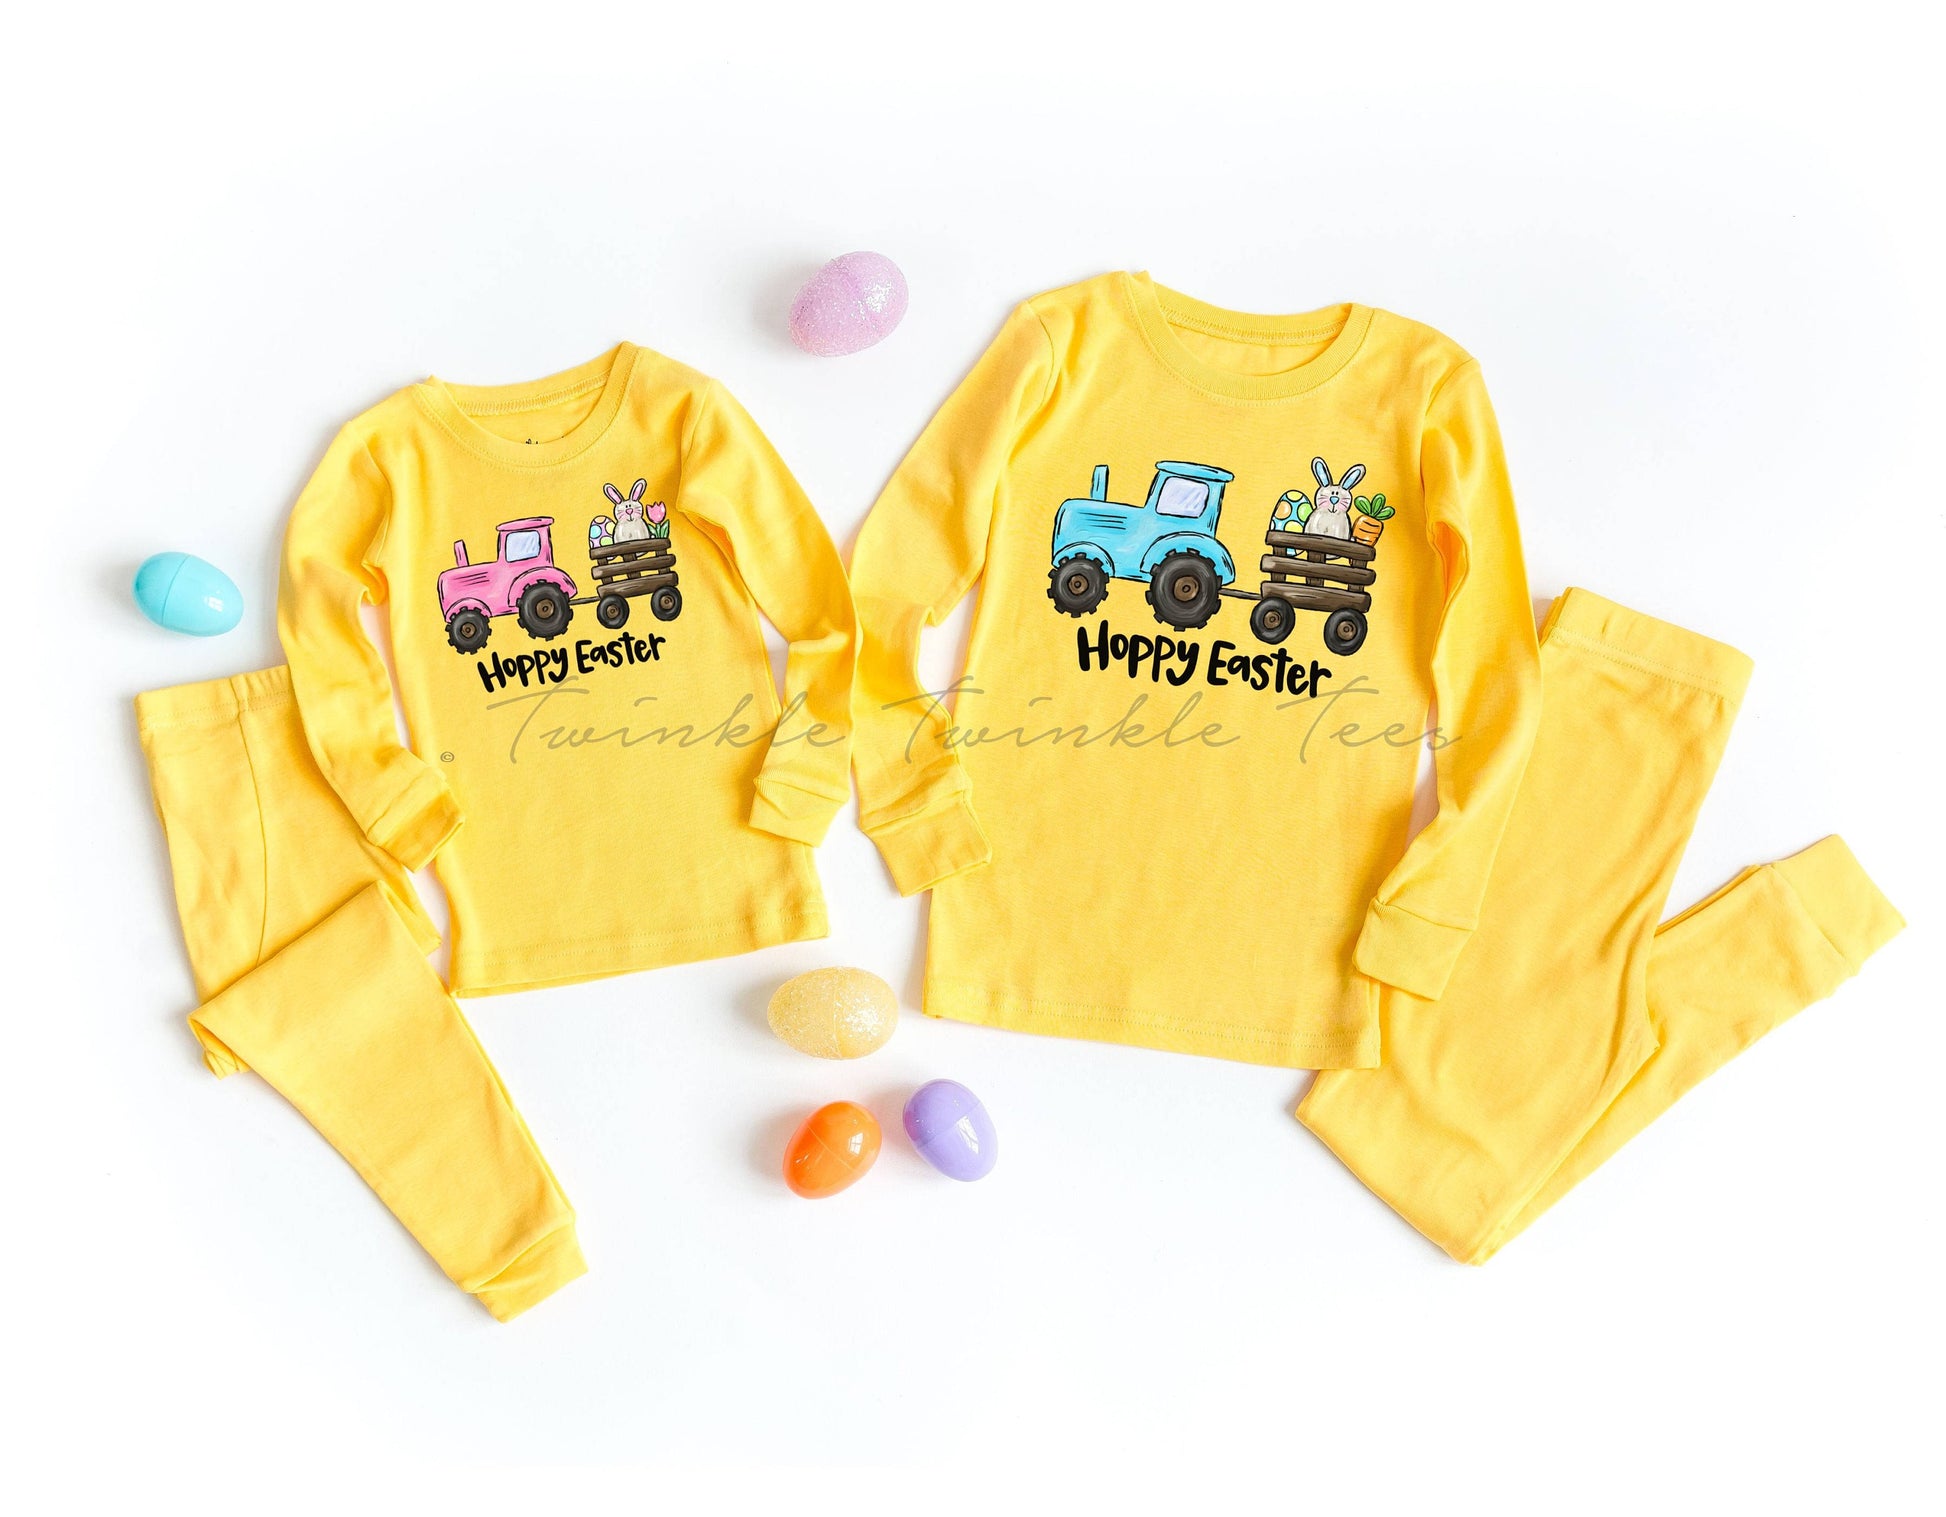 Hoppy Easter Tractor Solid Yellow Pajamas, easter pajamas for the family, matching easter pajamas